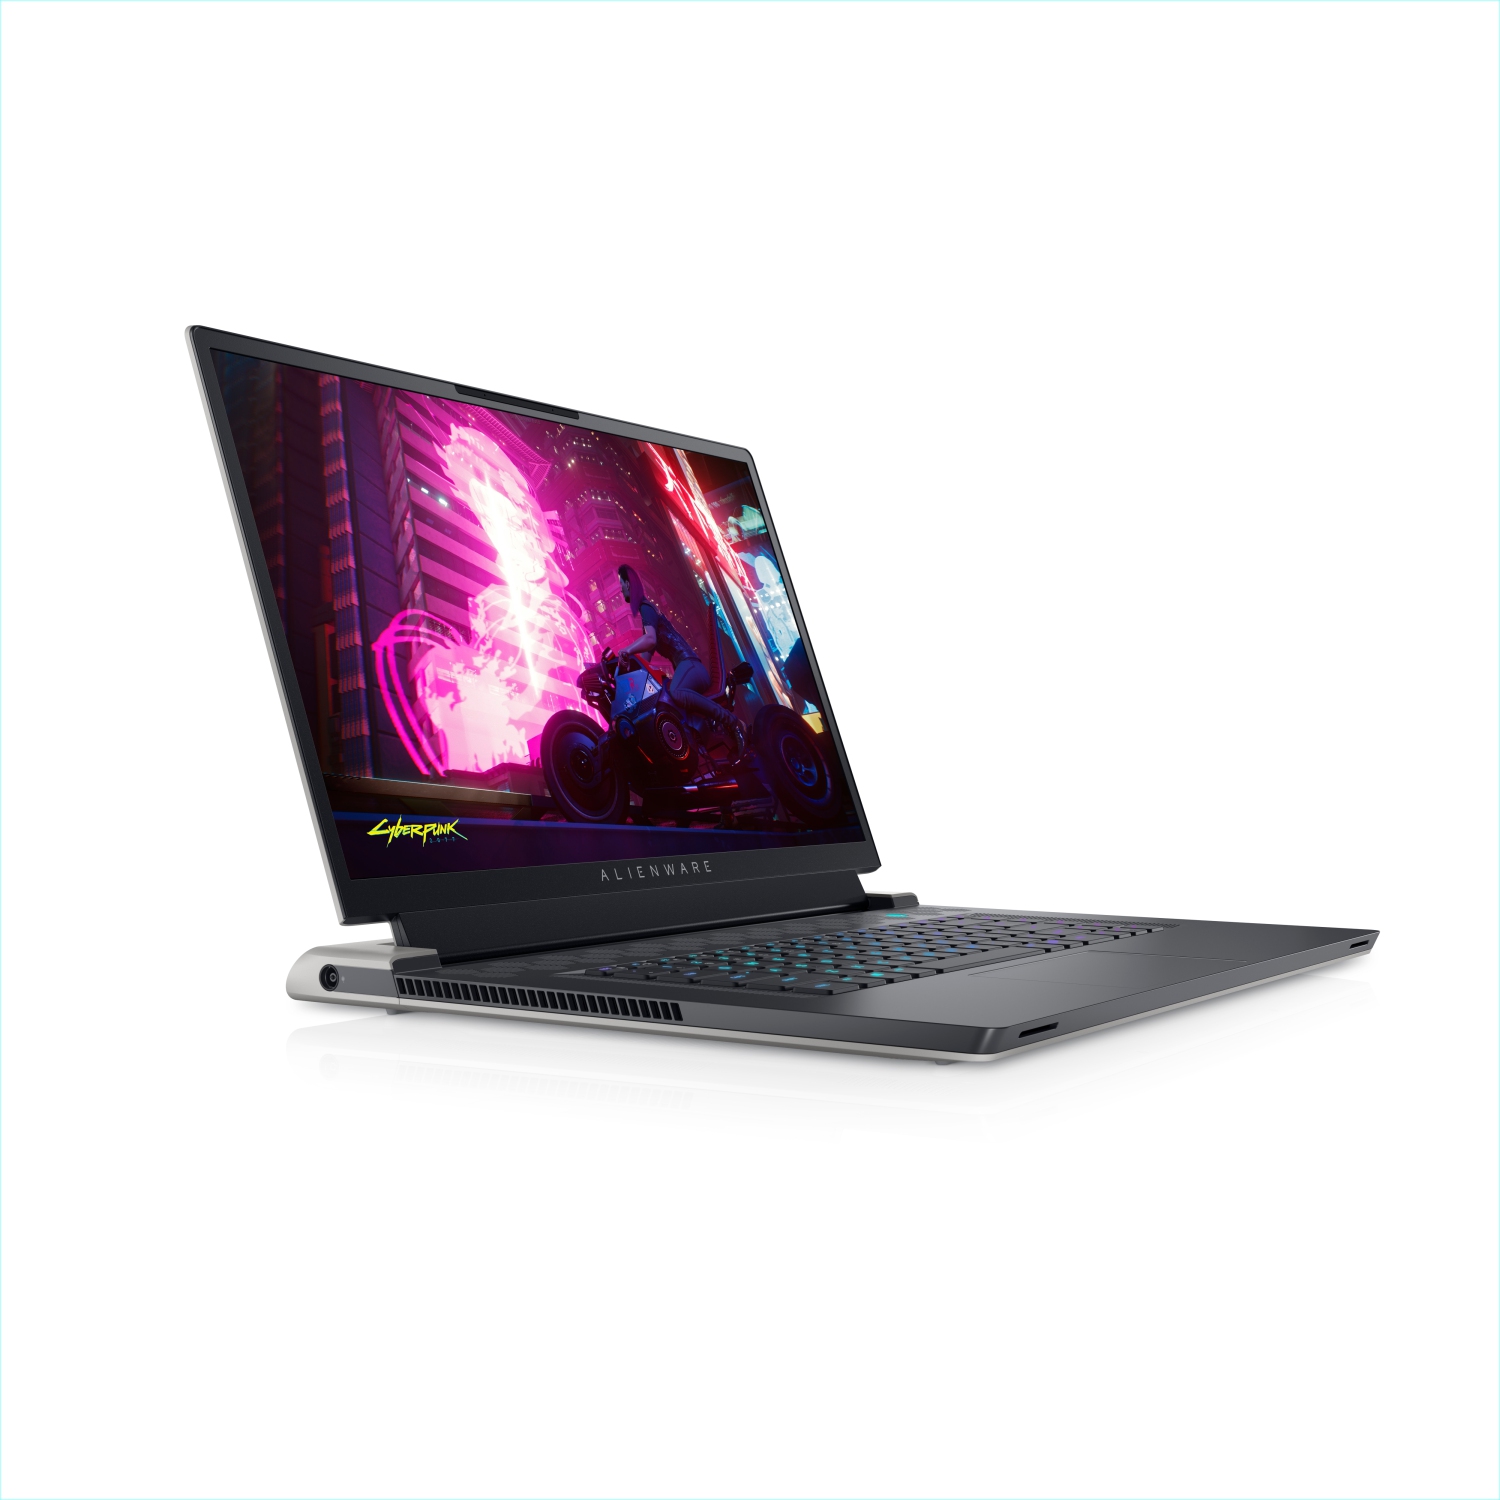 Refurbished (Excellent) - Dell Alienware X17 R1 Gaming Laptop (2021), 17.3" 4K, Core i9, 2TB SSD + 2TB SSD, 32GB RAM, RTX 3080, 8 Cores @ 5 GHz, 11th Gen CPU Certified